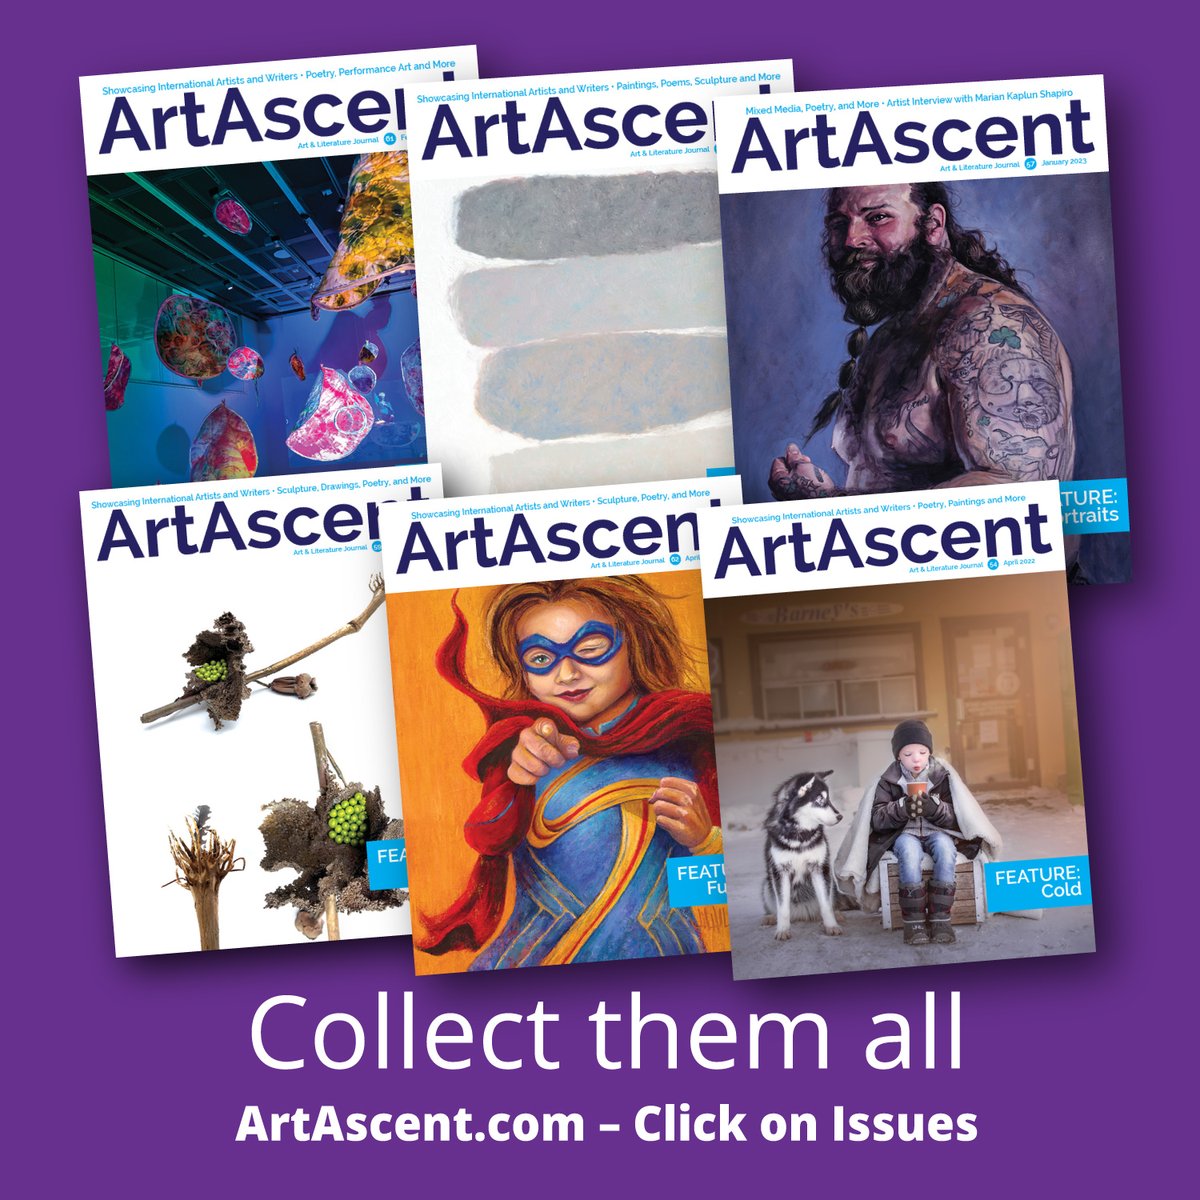 Want creative inspiration? Check out the brilliant work of many artists and writers in each issue. ArtAscent.com

#ArtMagazine #ArtJournal #PoetryCollection #StoryCollection #ArtCollection #Artists #Writers #Exhibition #ArtAscent #ArtCollector #ContemporaryArt